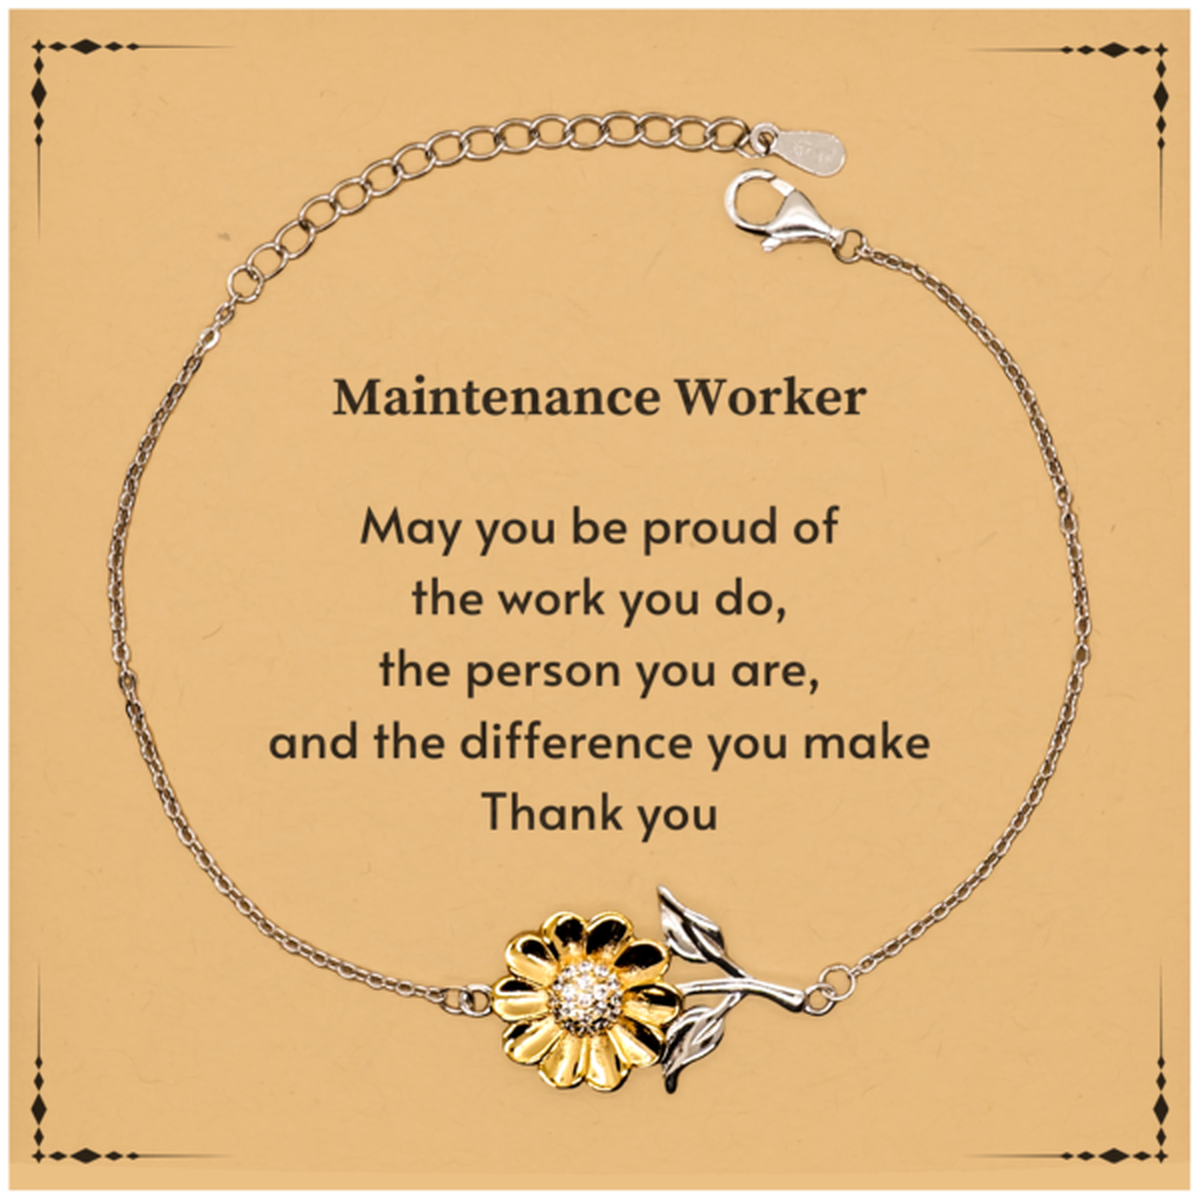 Heartwarming Sunflower Bracelet Retirement Coworkers Gifts for Maintenance Worker, Maintenance Worker May You be proud of the work you do, the person you are Gifts for Boss Men Women Friends